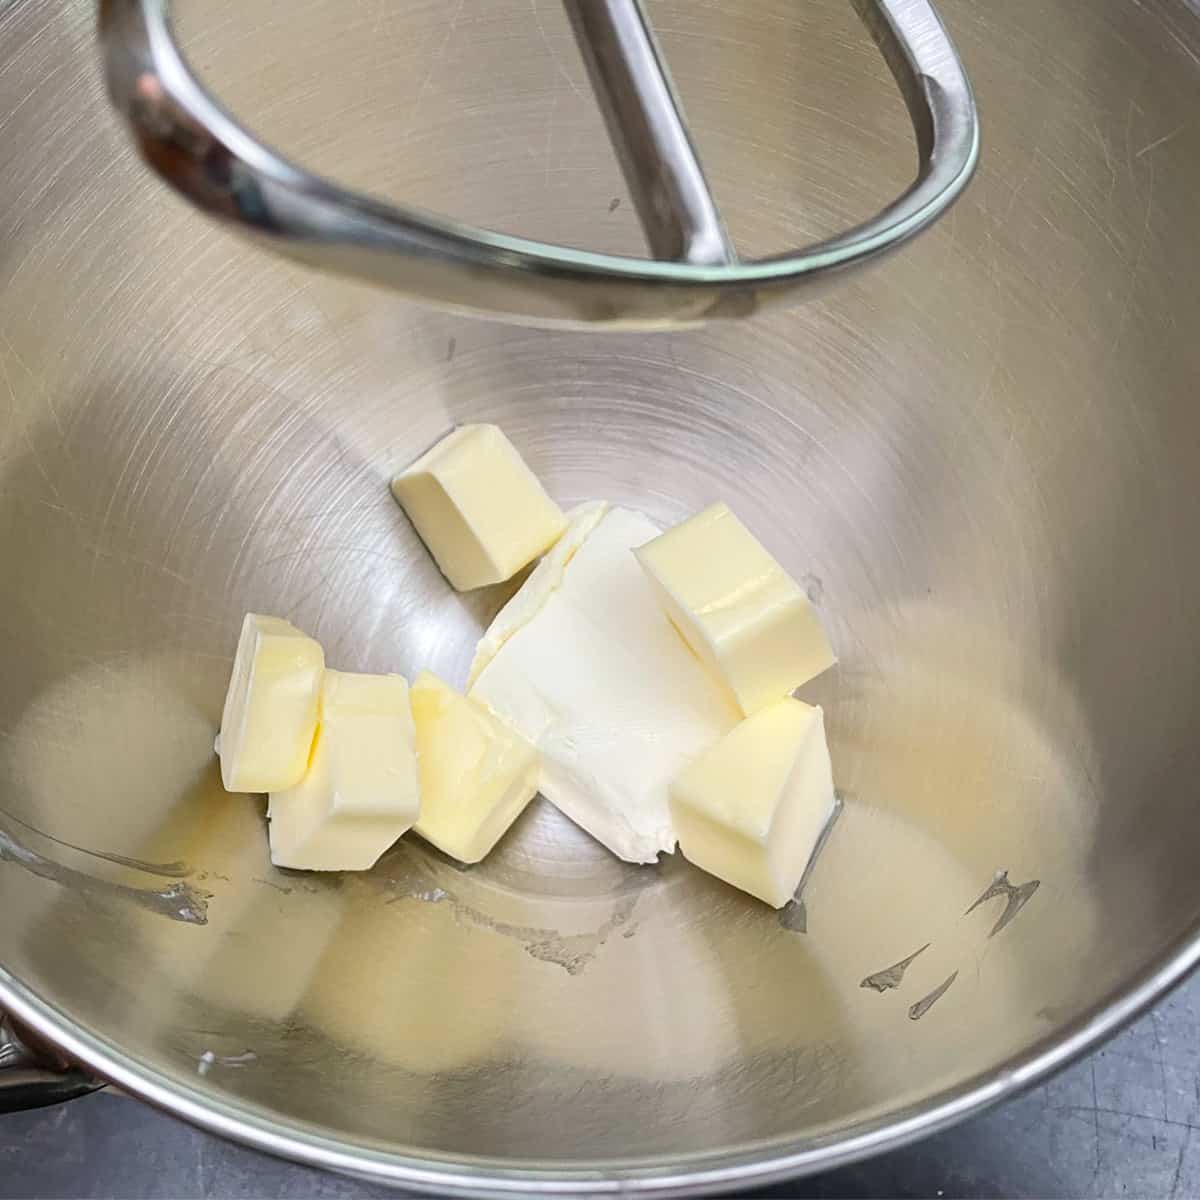 Cream cheese and butter cut into slices ready to be mixed.